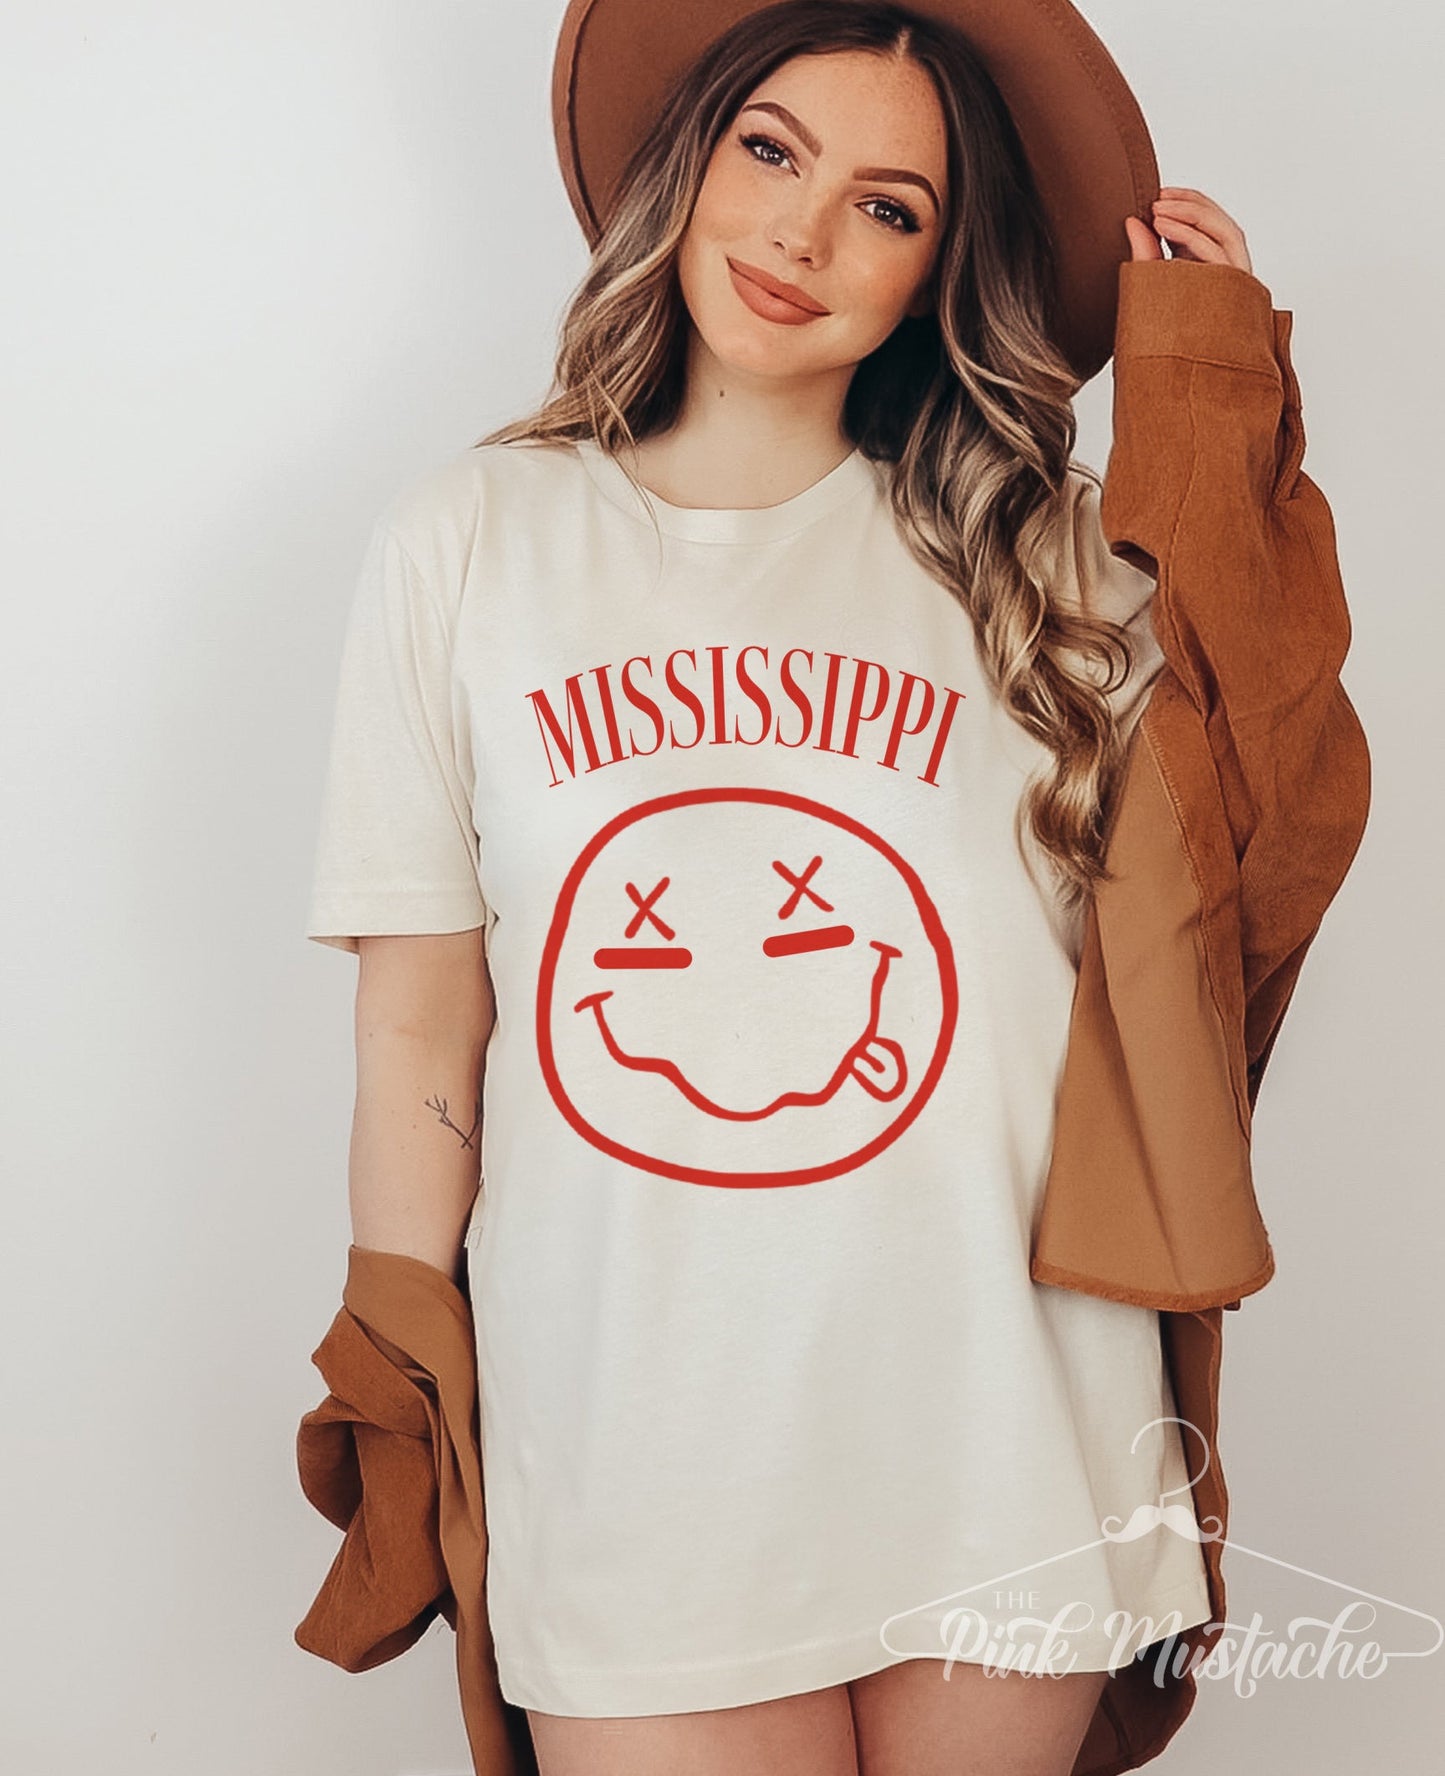 Mississippi Smiley Rocker Shirt/ Softstyle Tee/ Toddler, Youth and Adult Sizing Available